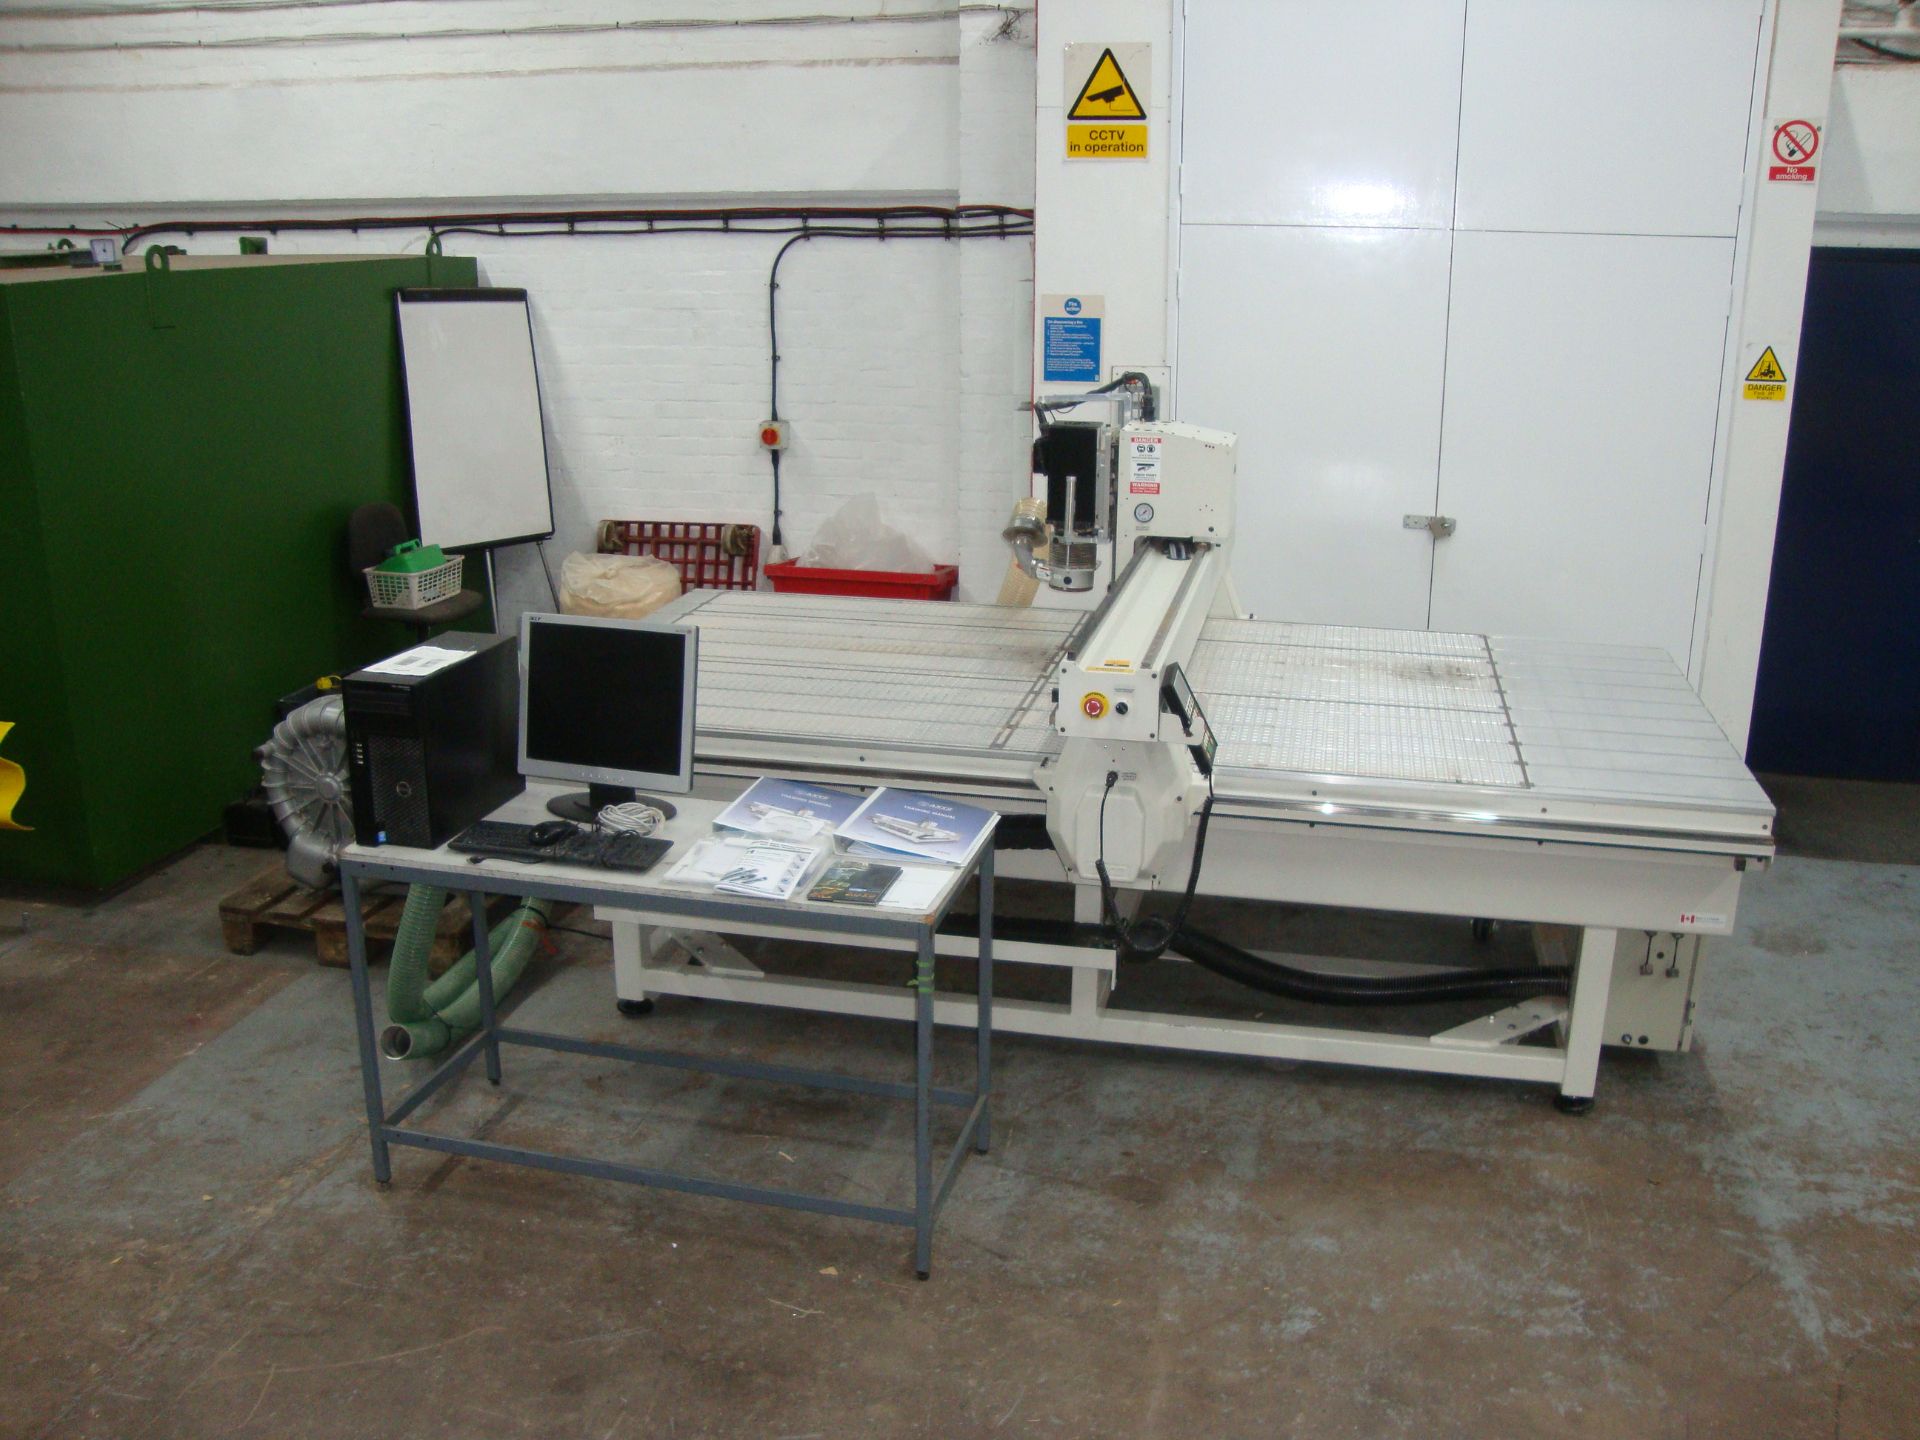 2015 Pacer 4008 CNC router - cost £40,000